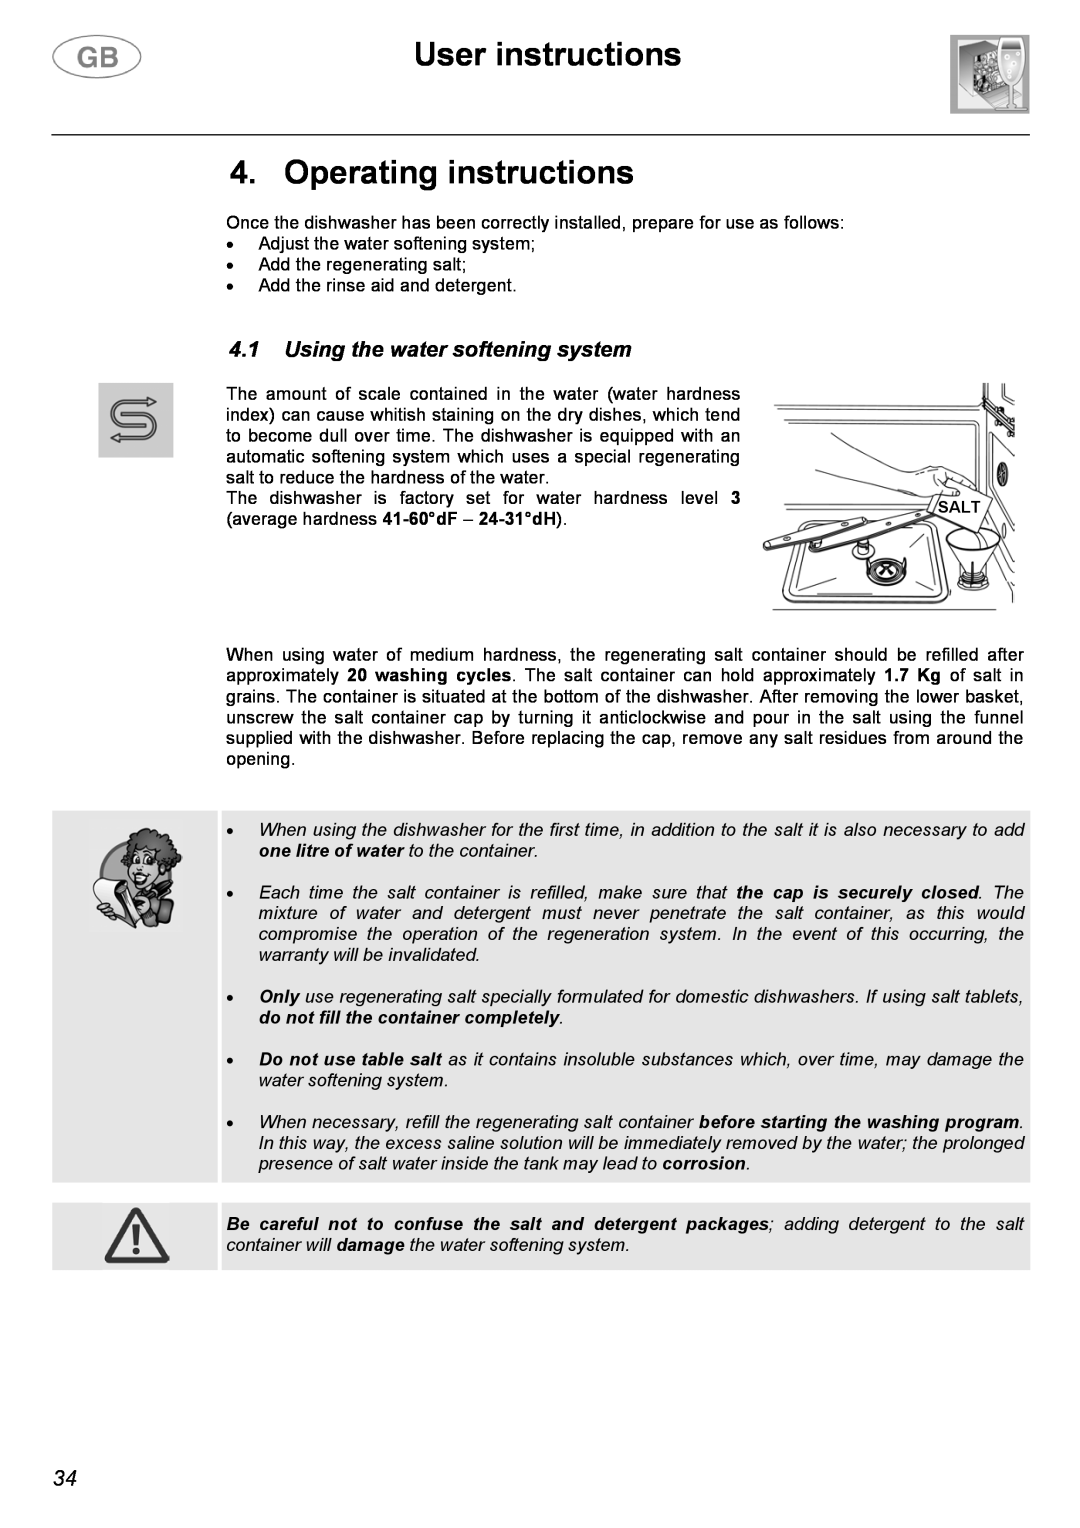 Smeg CA01-1 instruction manual User instructions 4. Operating instructions, 4.1Using the water softening system 